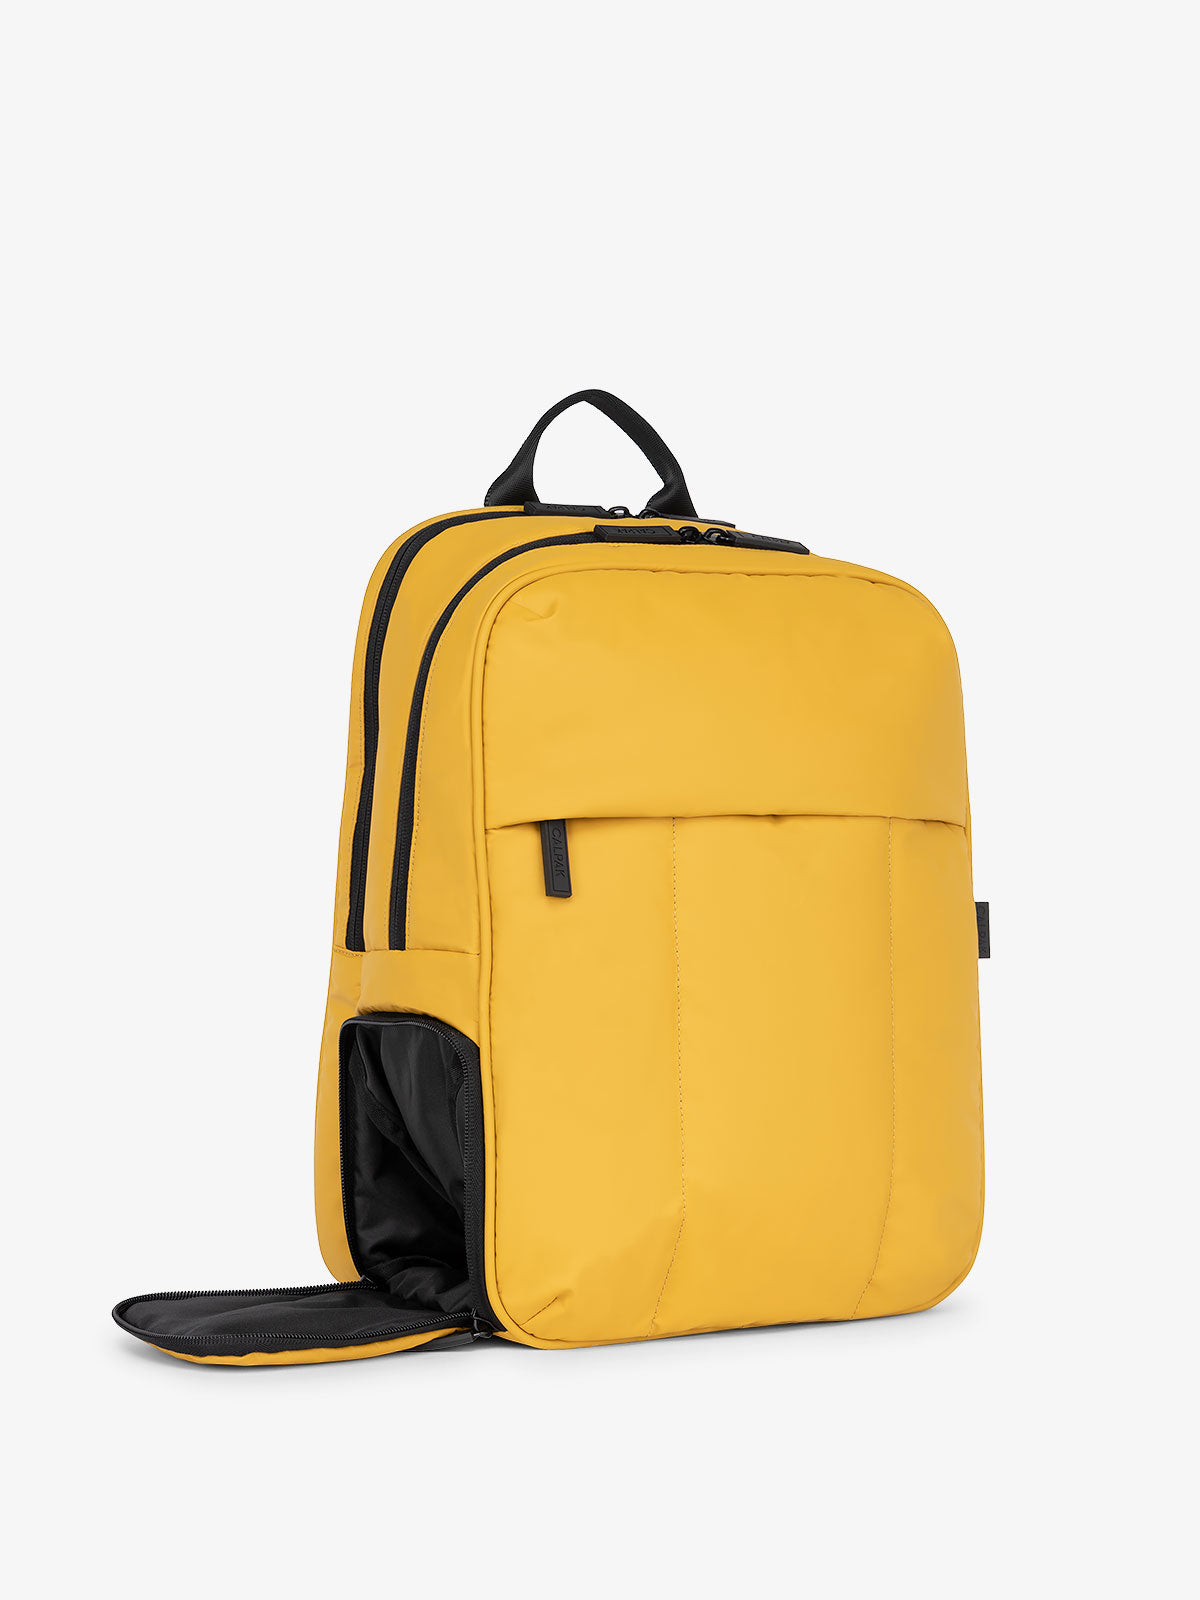 Luka Laptop Backpack with shoe compartment in yellow